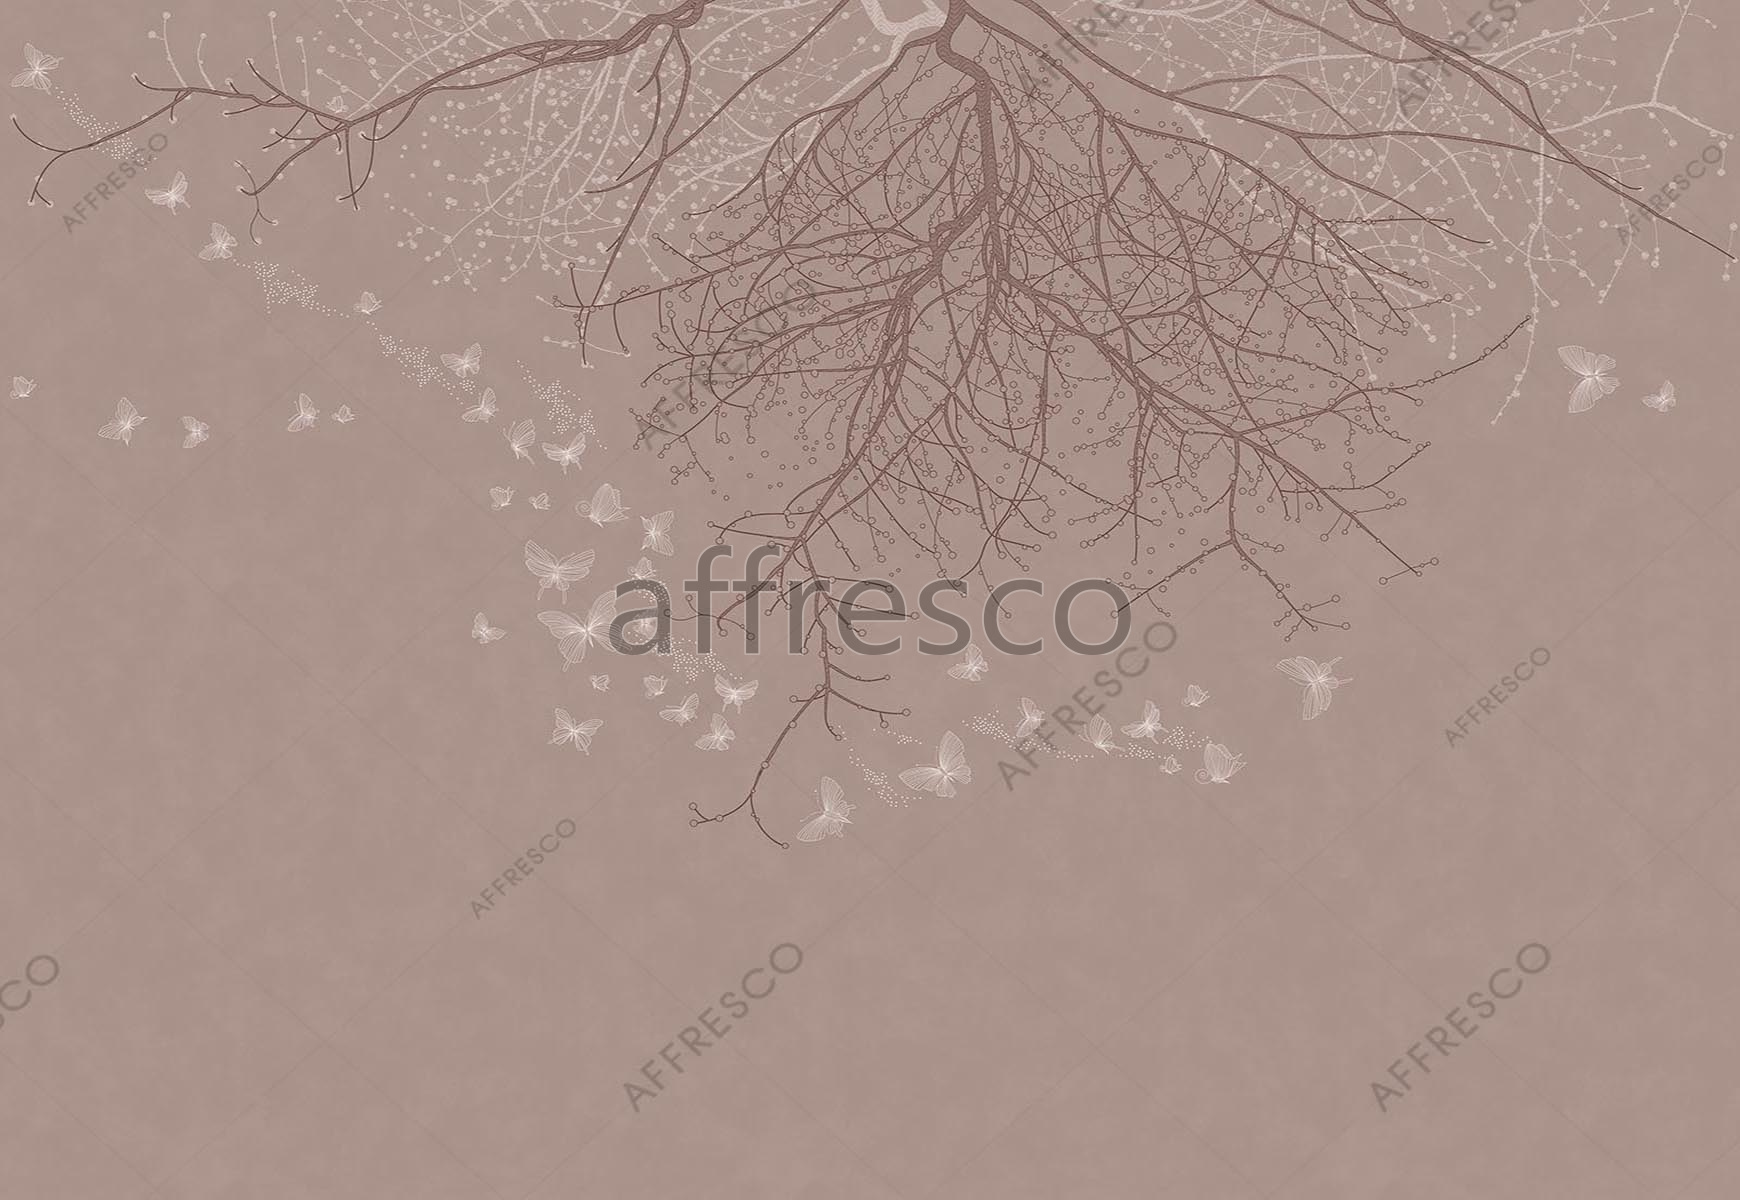 ID139247 | Forest | spring butterfly on the branches | Affresco Factory